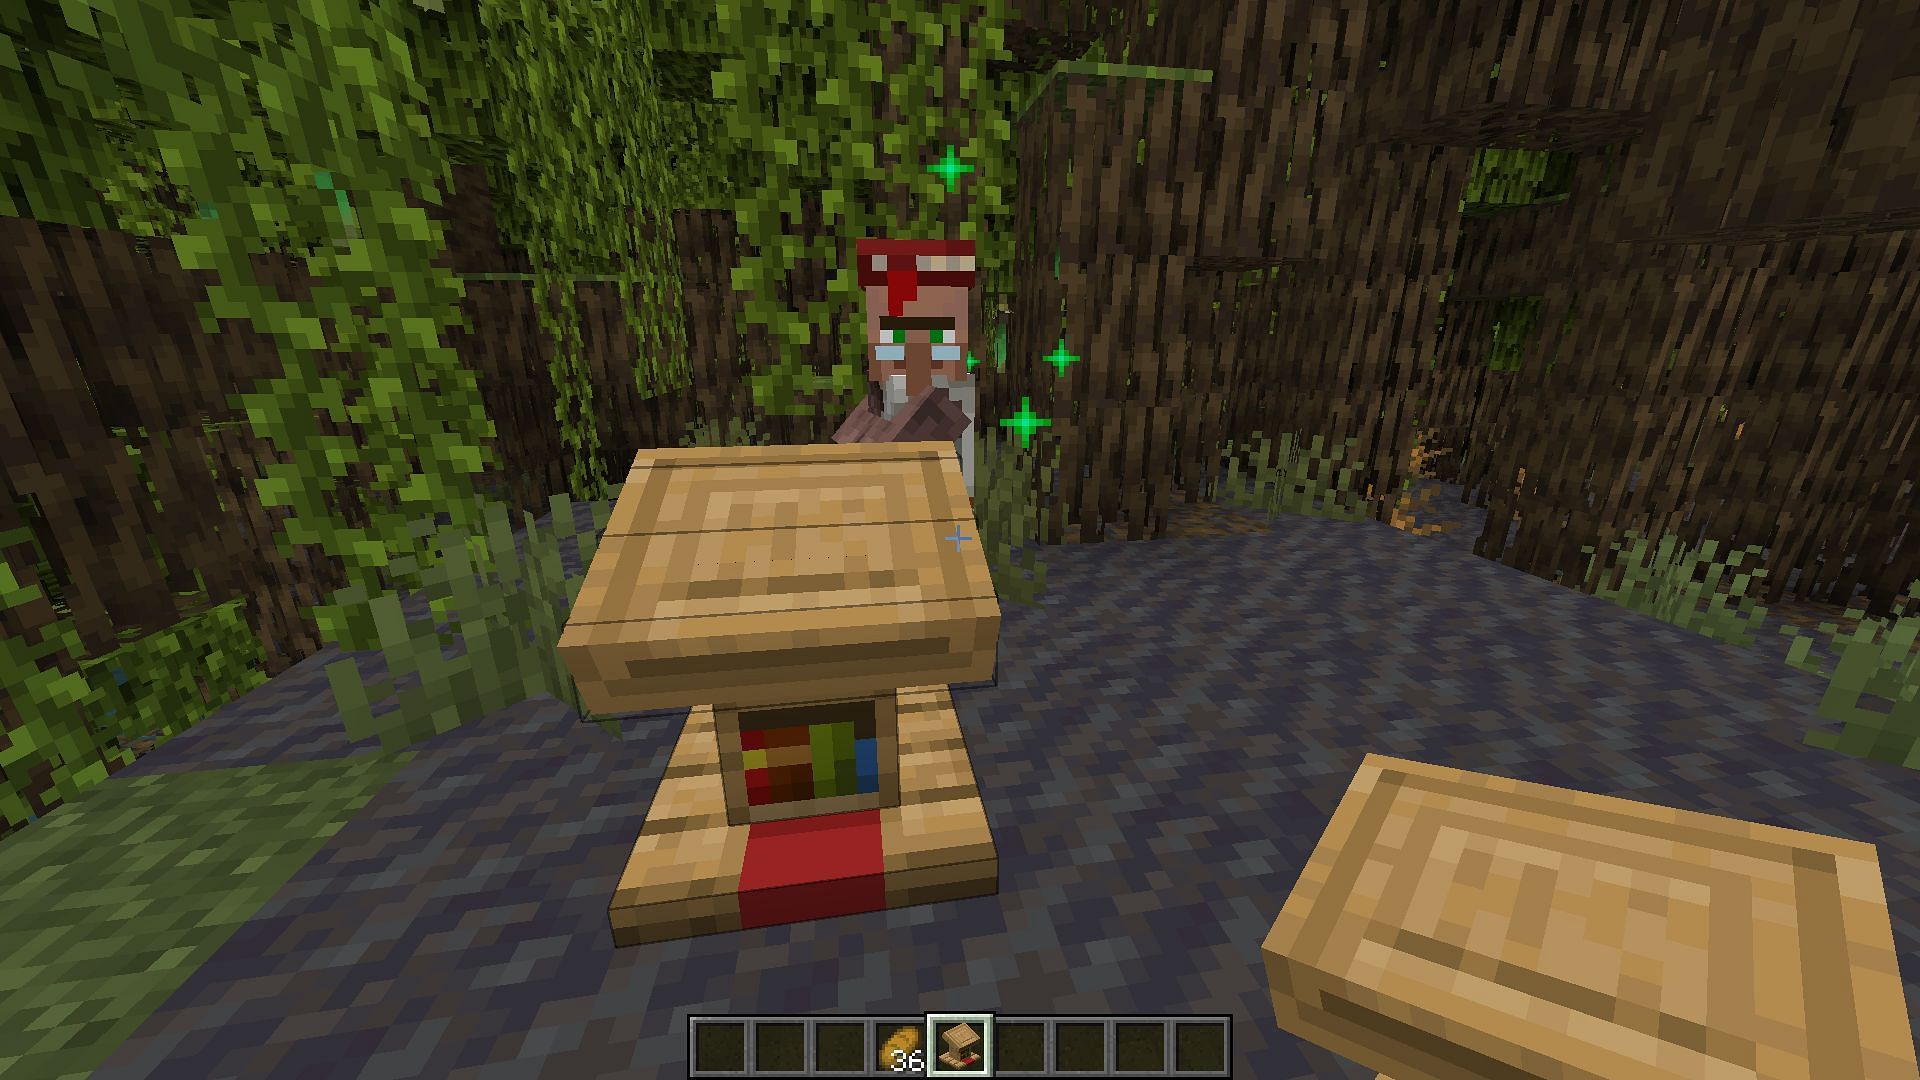 Lectern can be crafted with wood slabs and bookshelves in order to employ a librarian villager in Minecraft 1.19 (Image via Mojang)